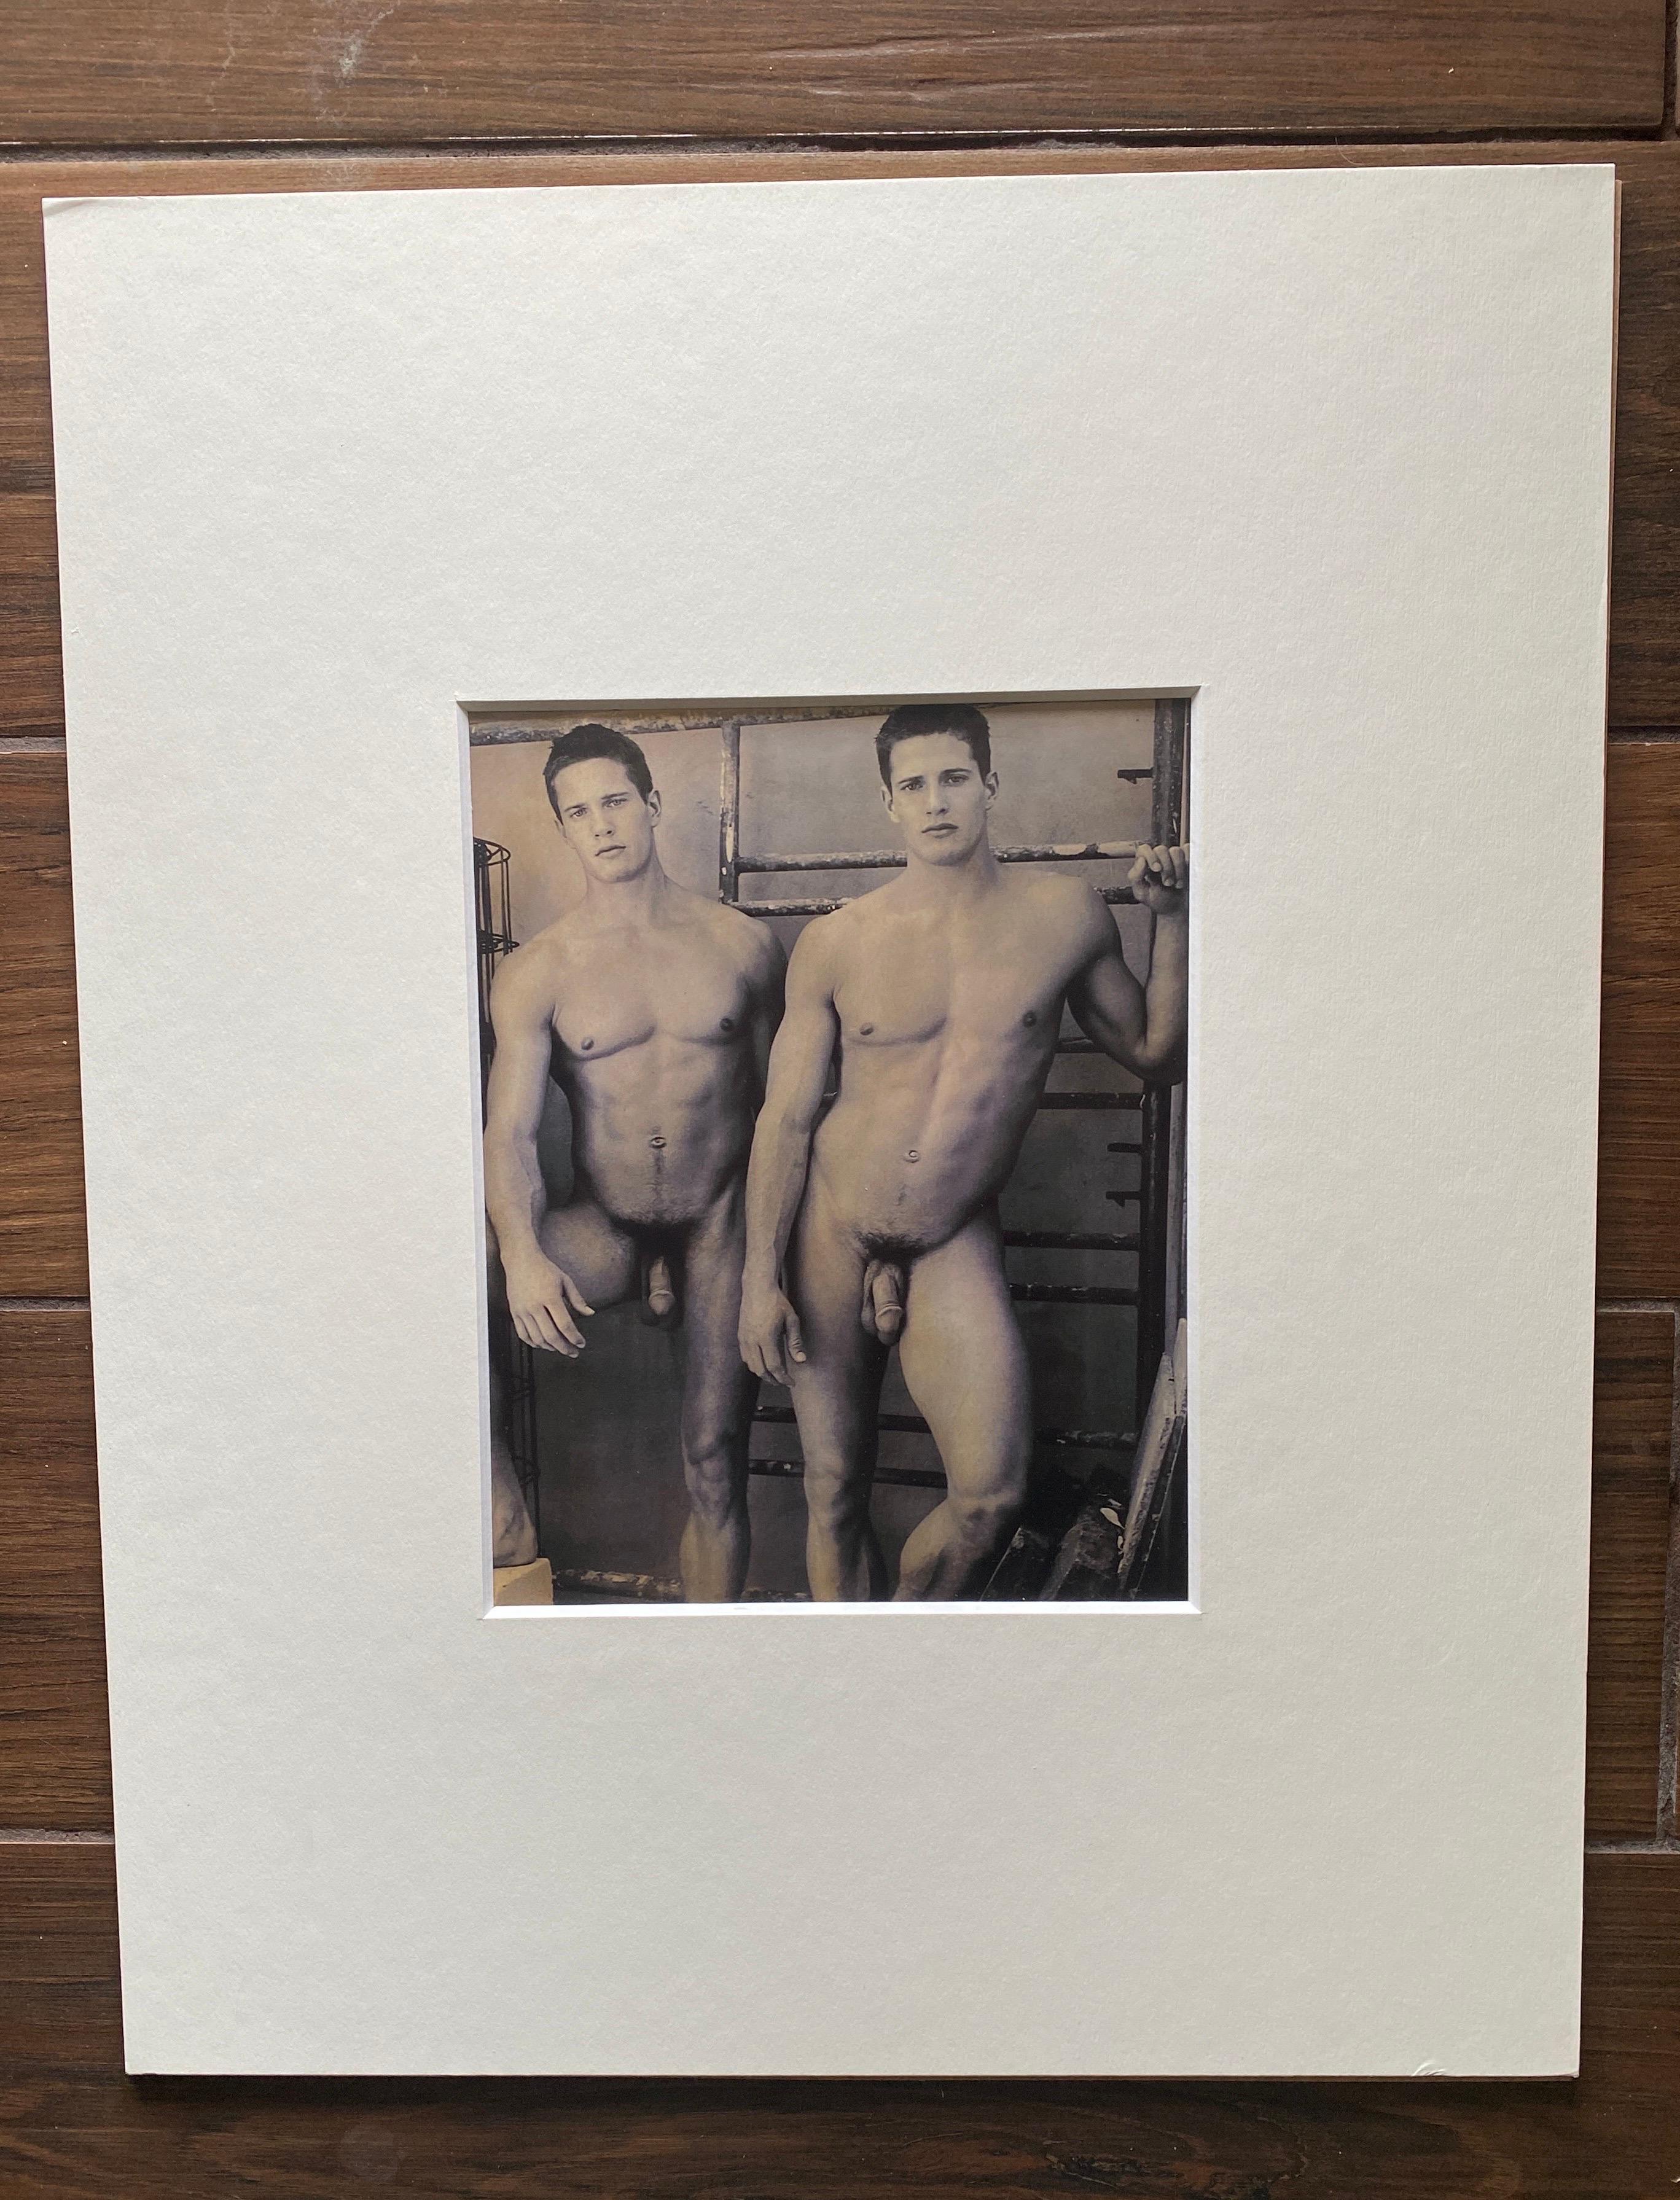 We are selling 4 images of the Carlson Twins, Lane and Kyle. What we know: the series of nudes was shot by Bruce Weber in 2000. They are titled “Kyle and Lane Carlson, 2000, Bruce Weber”. All 4 images appear to be hand toned (not computer